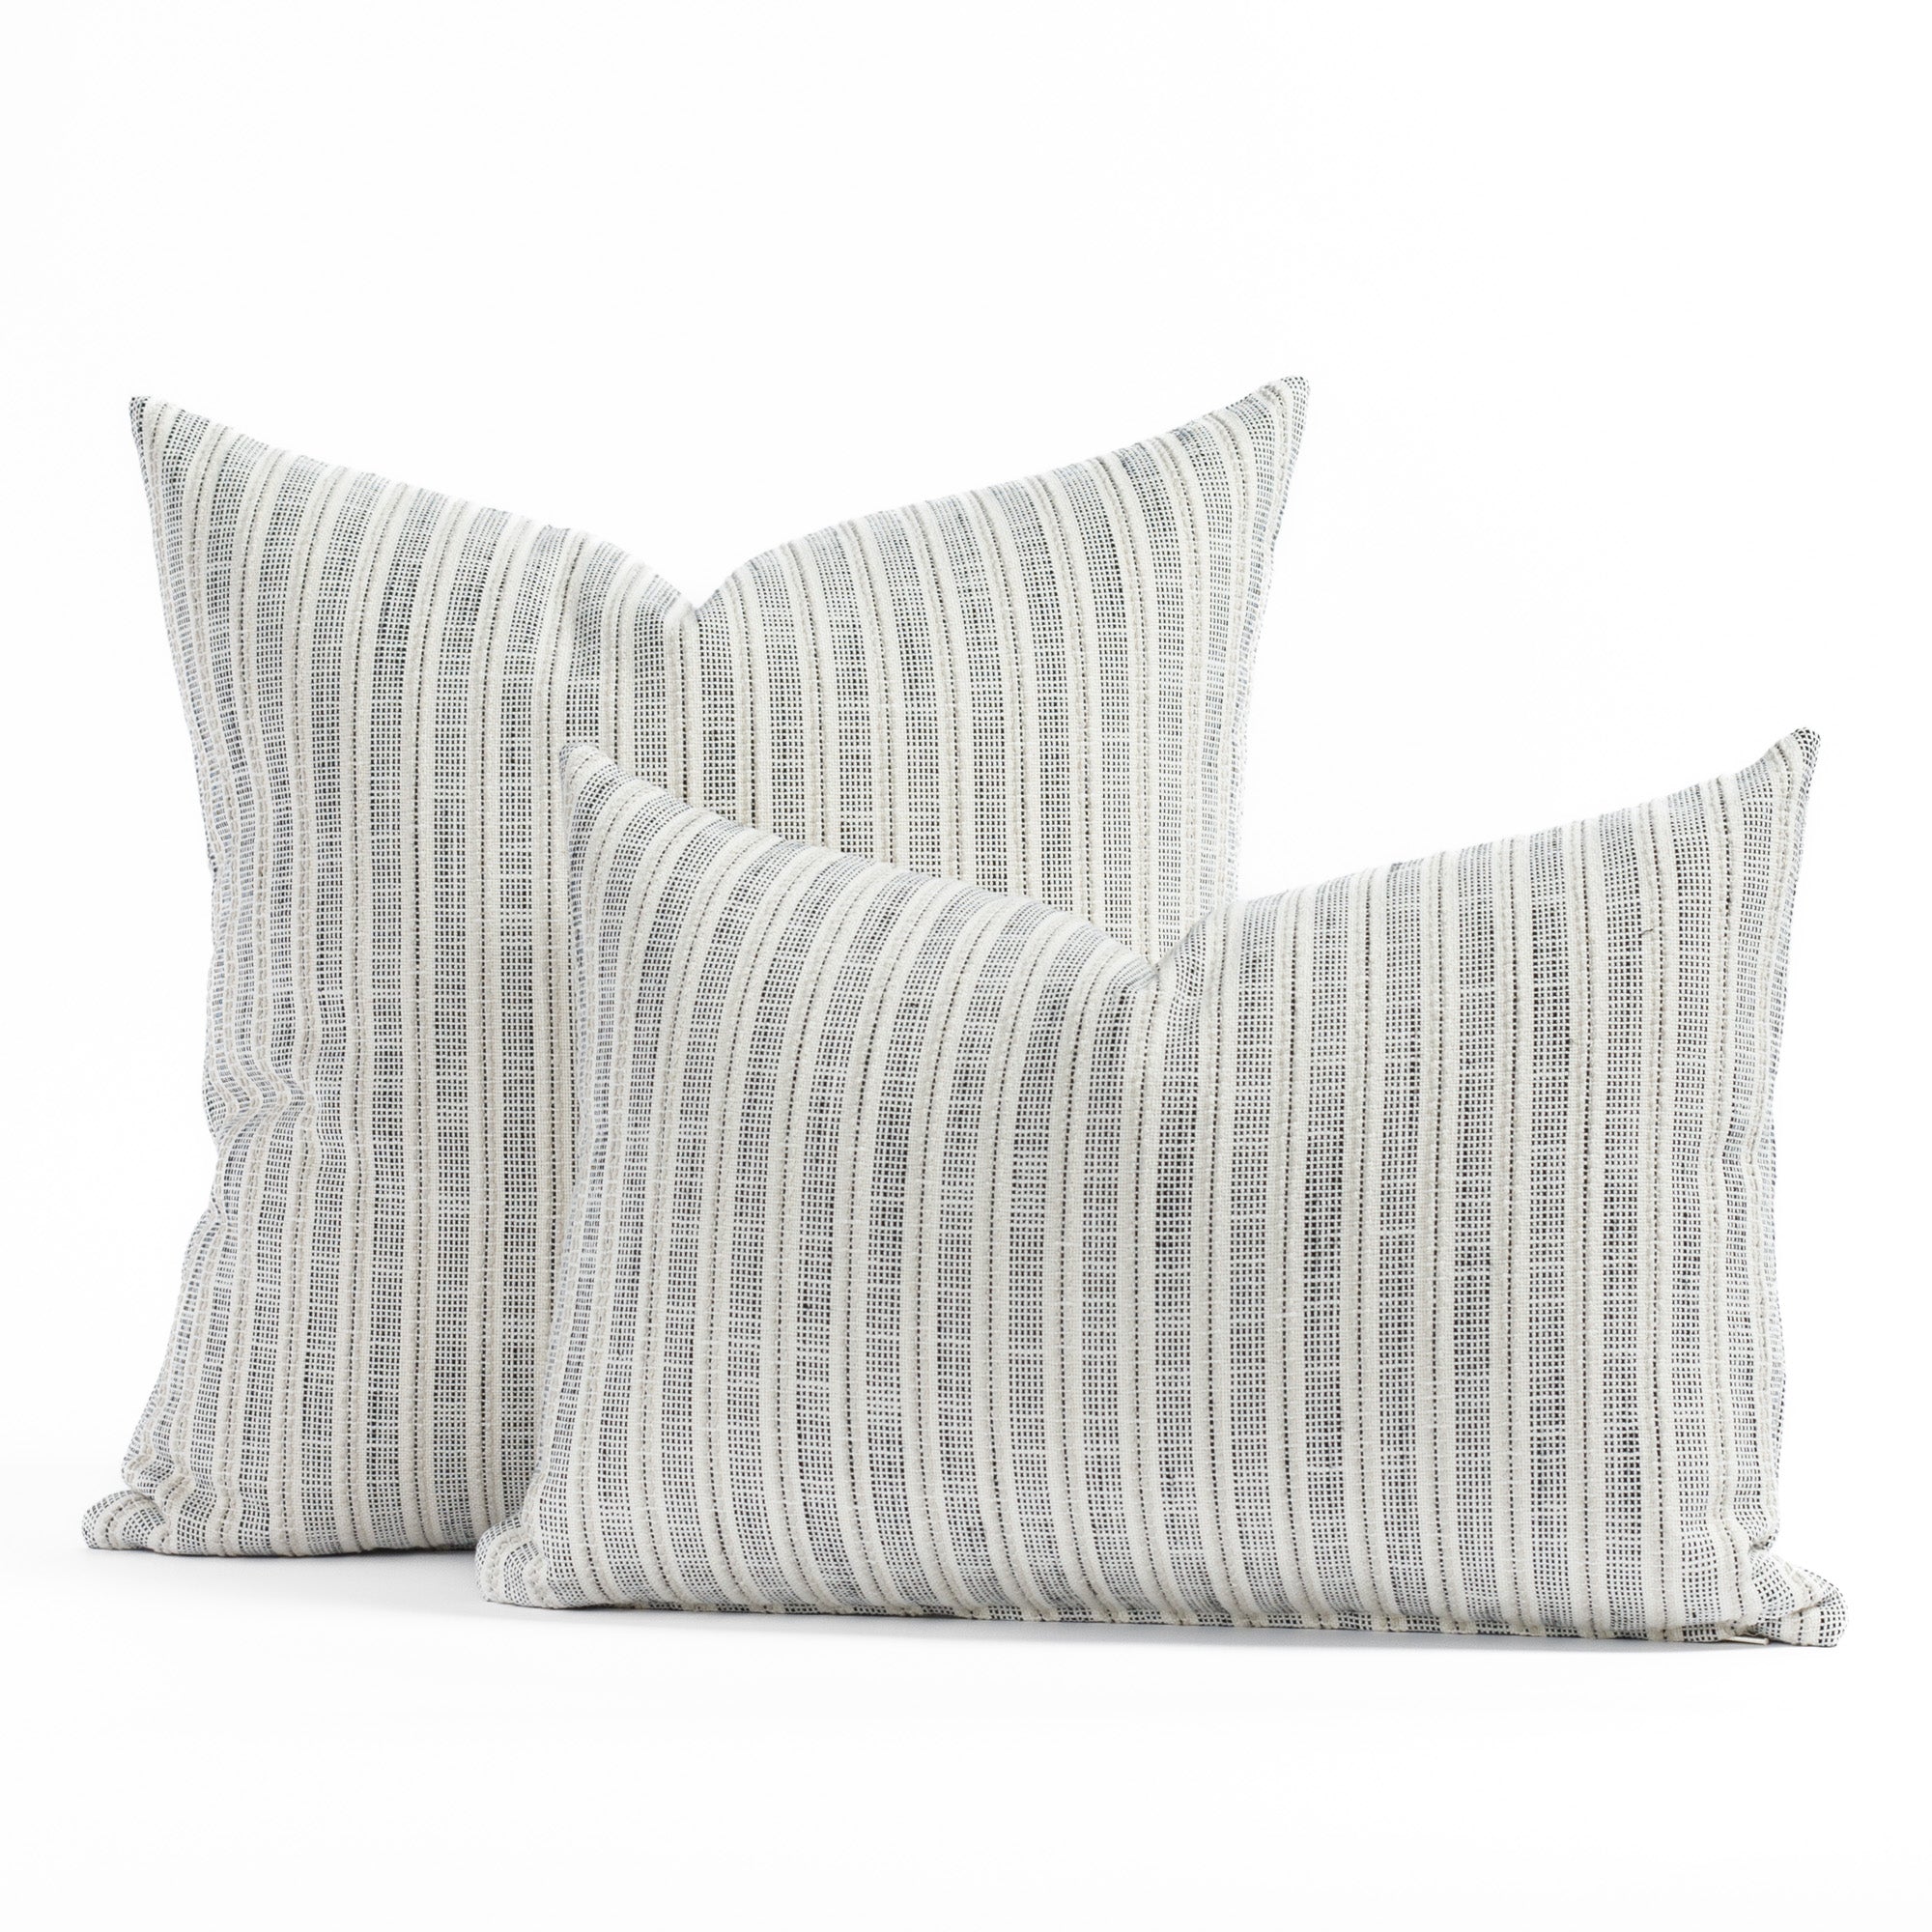 Amalfi stripe cream and black indoor outdoor pillows in two sizes